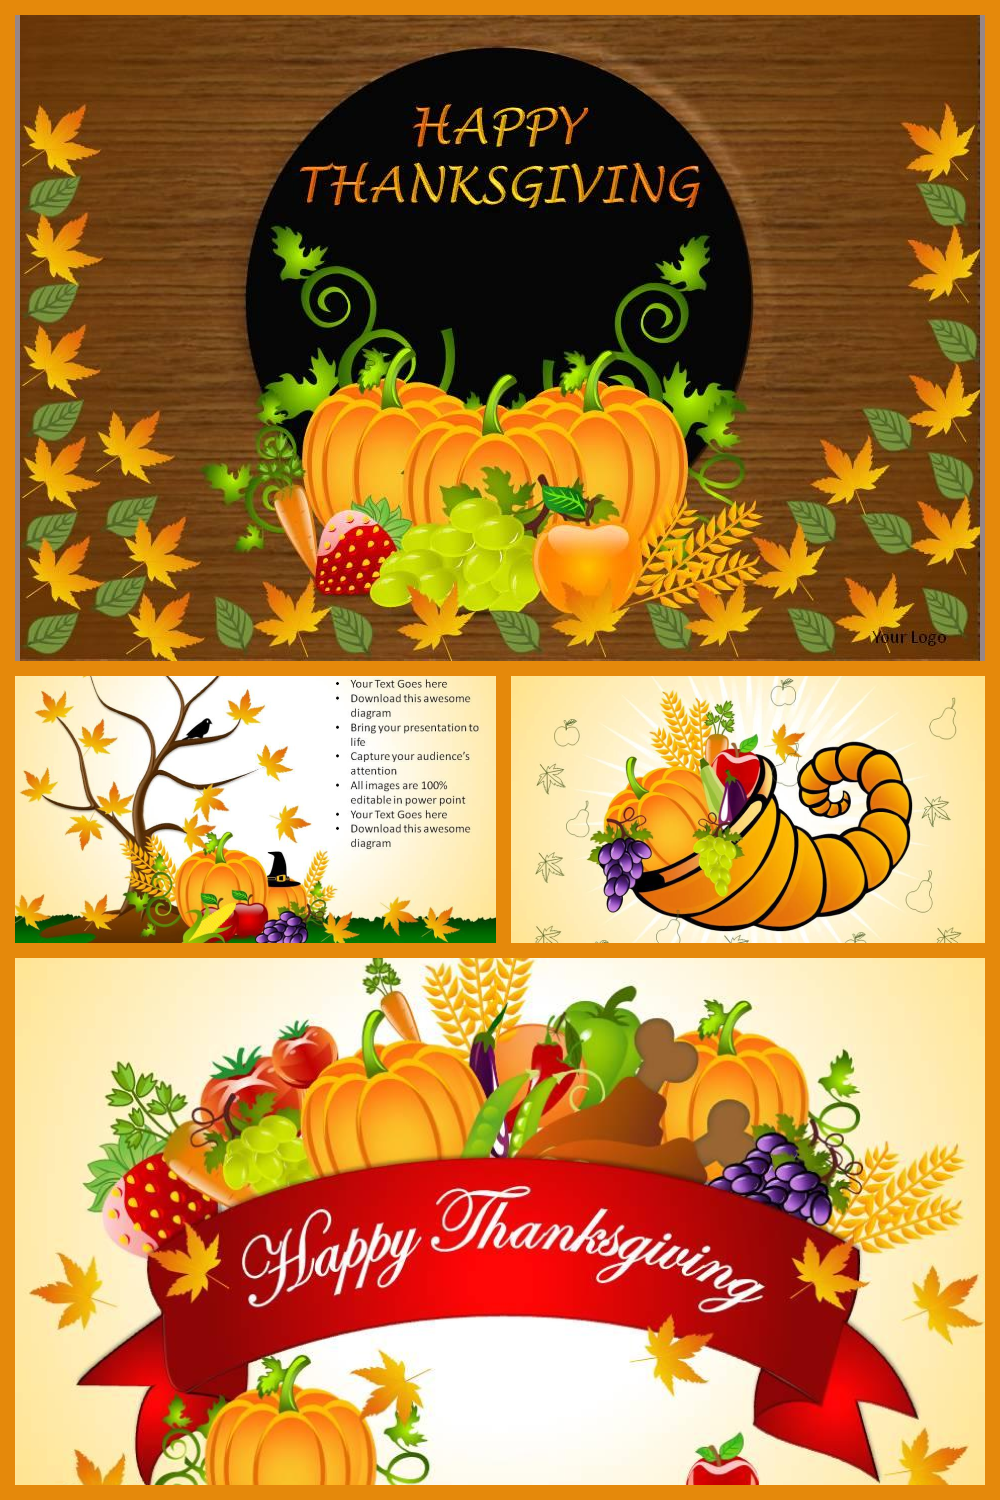 A collage of screenshots of presentation pages with a painted autumn harvest.